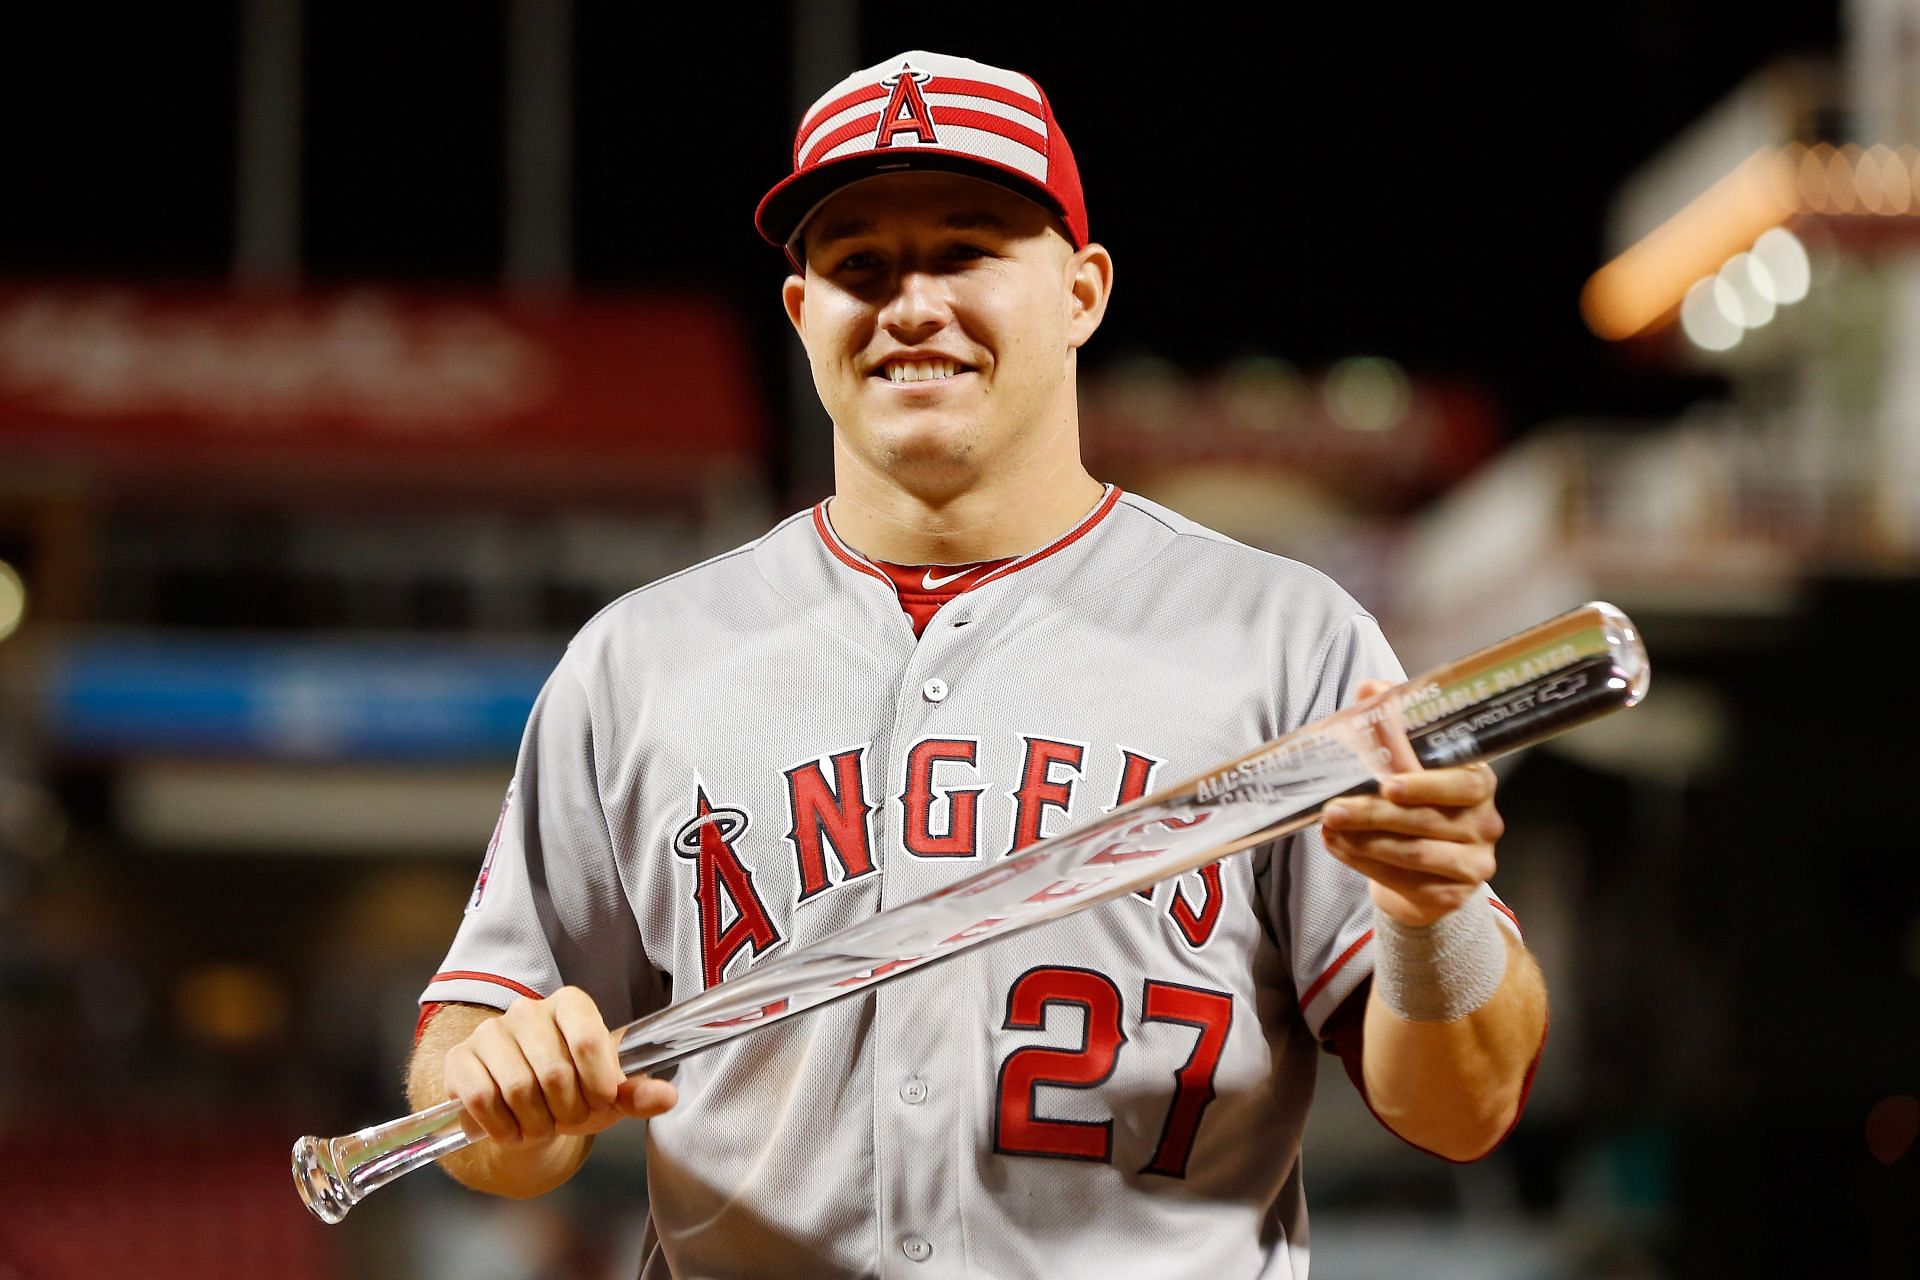 “Fly Eagles Fly” Says LA Angels Slugger Mike Trout as He Reaches